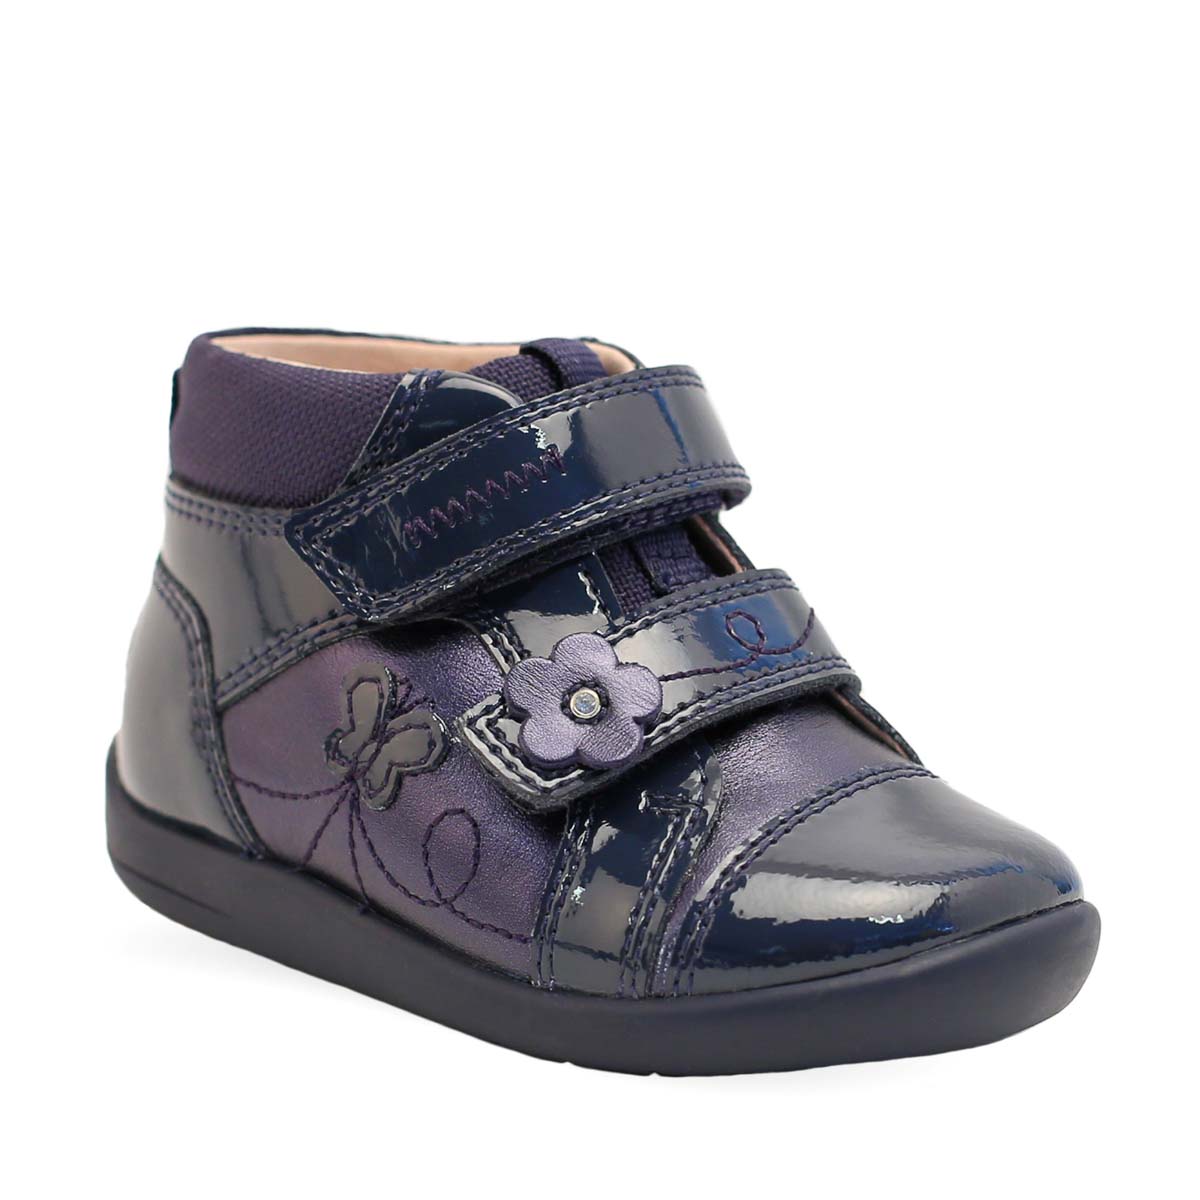 Start Rite - Daydream 2V In Navy Patent 0792-96F In Size 7.5 In Plain Navy Patent Infant Girls Boots  In Navy Patent For kids